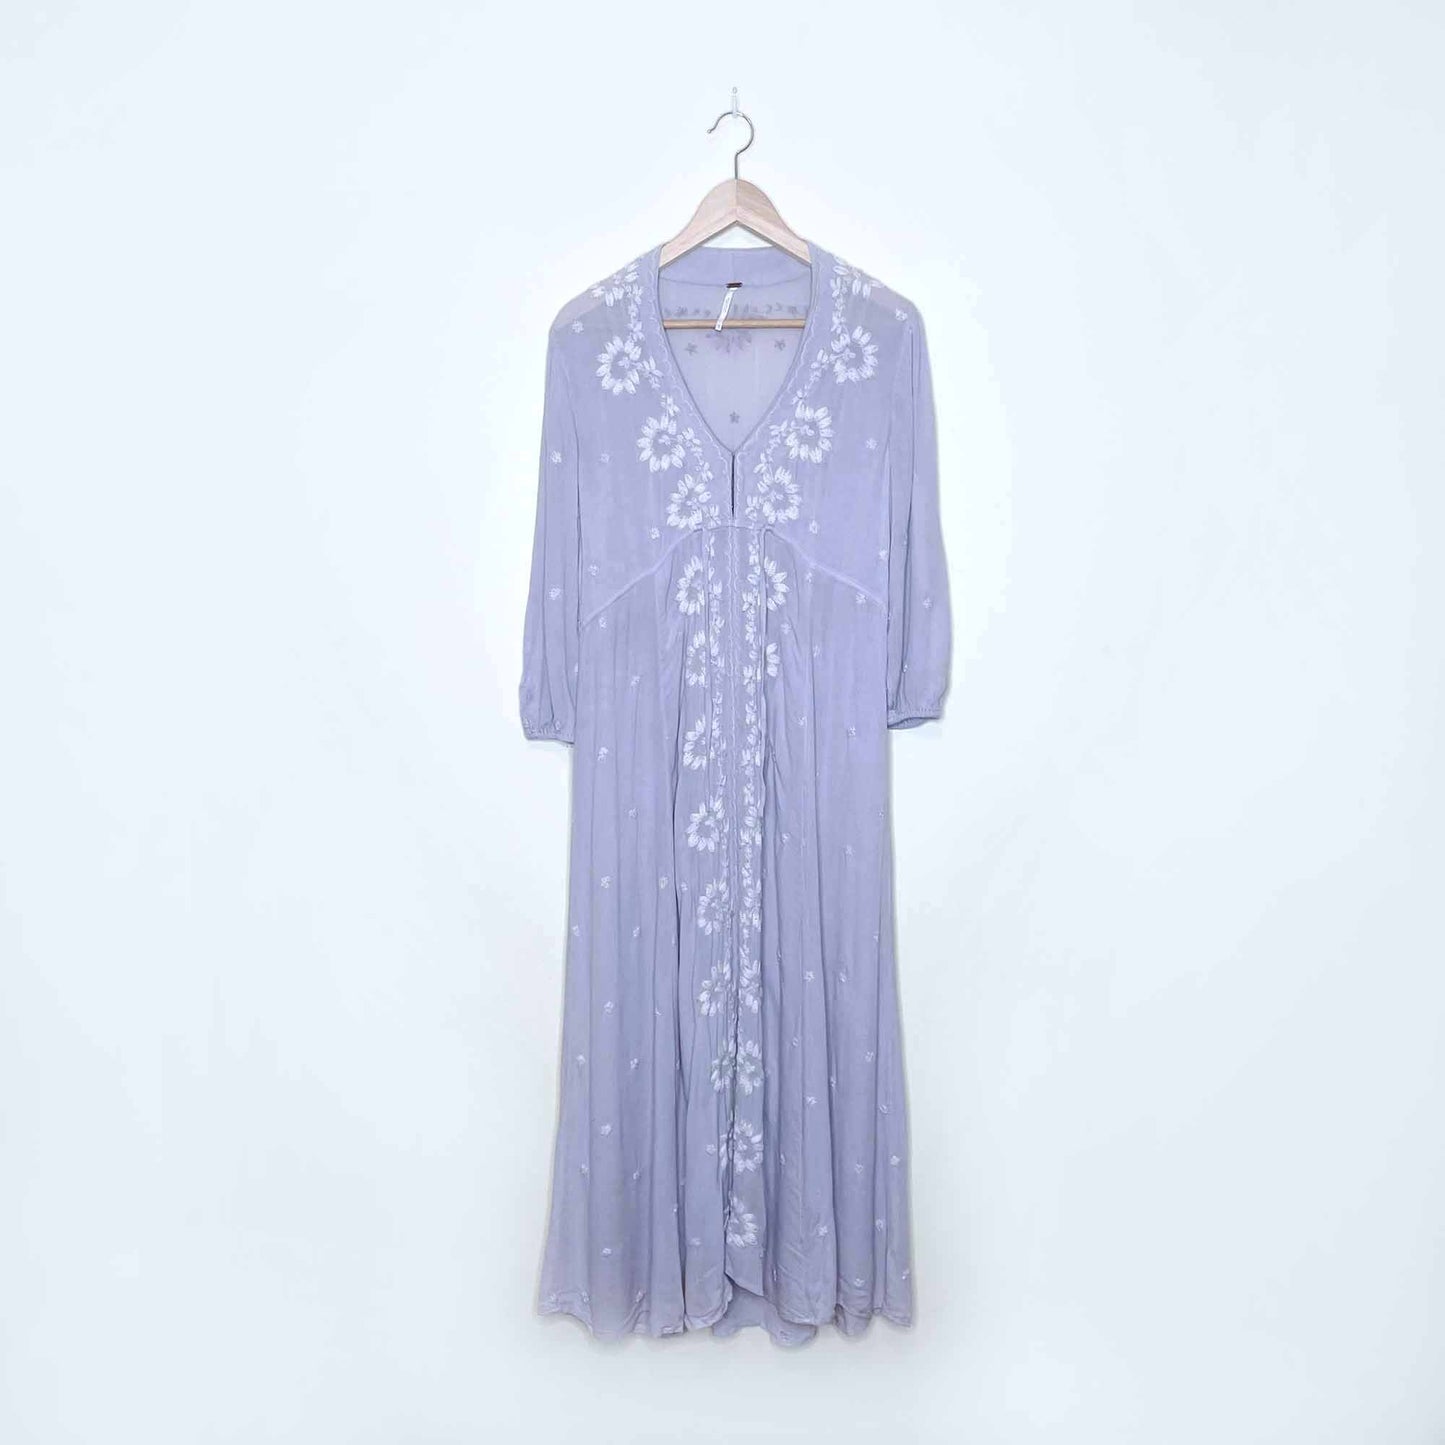 free people embroidered fable boho midi dress - size xs